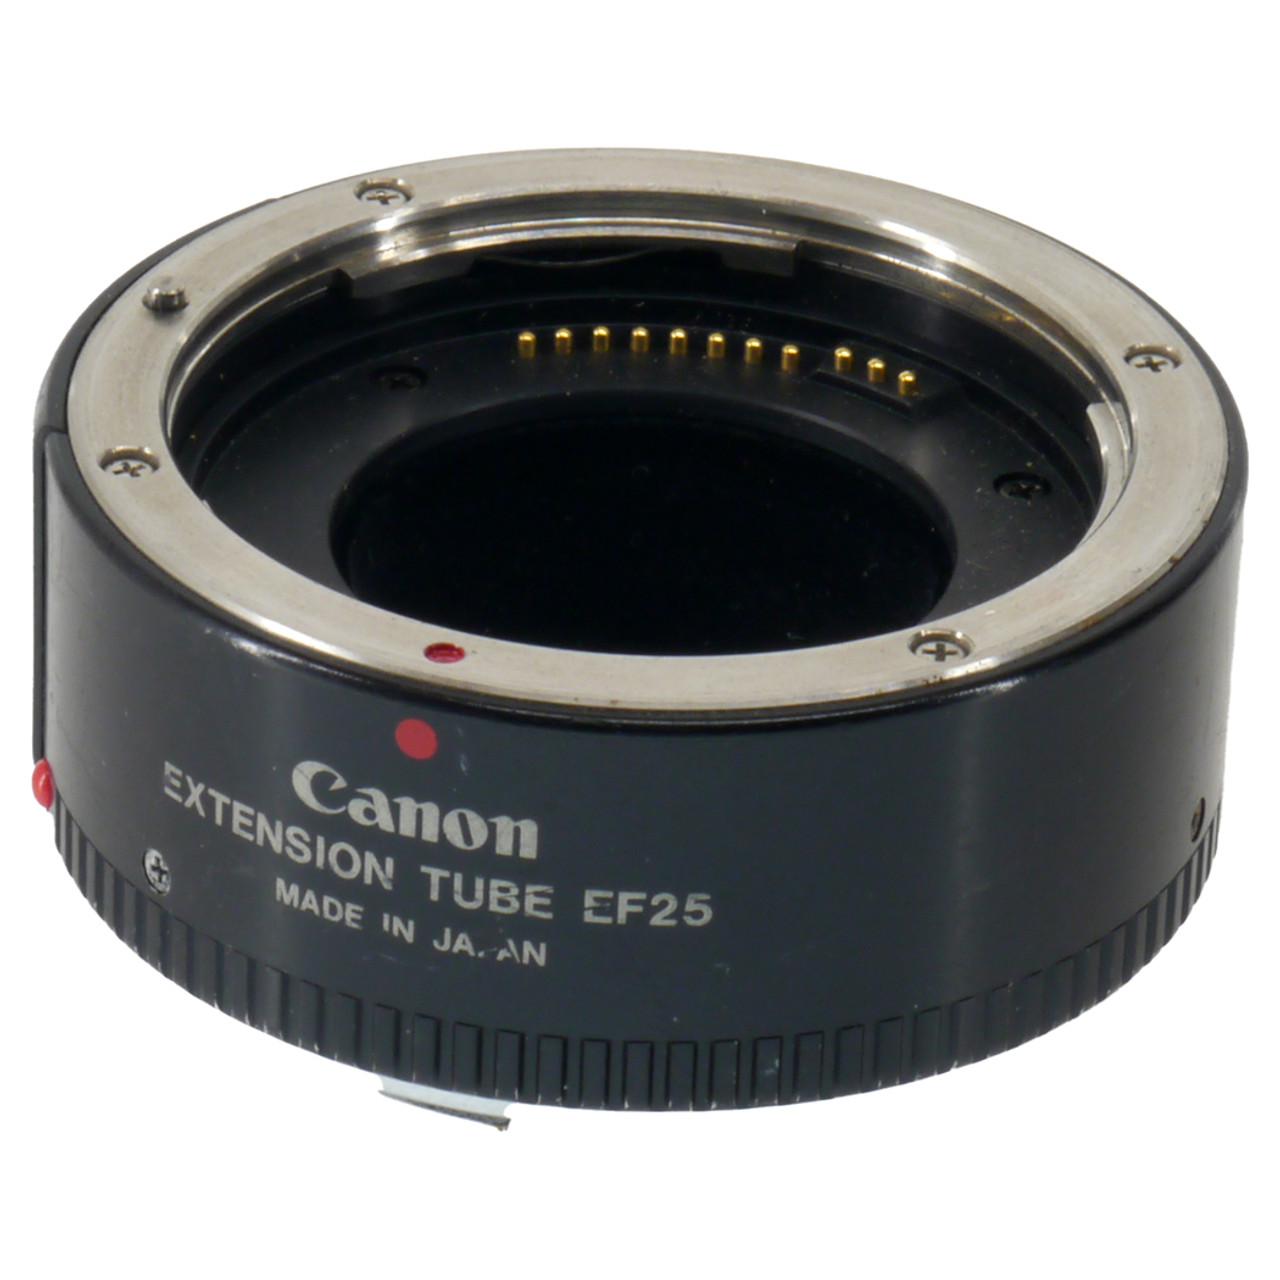 USED CANON EF25 EXTENSION TUBE (759415)